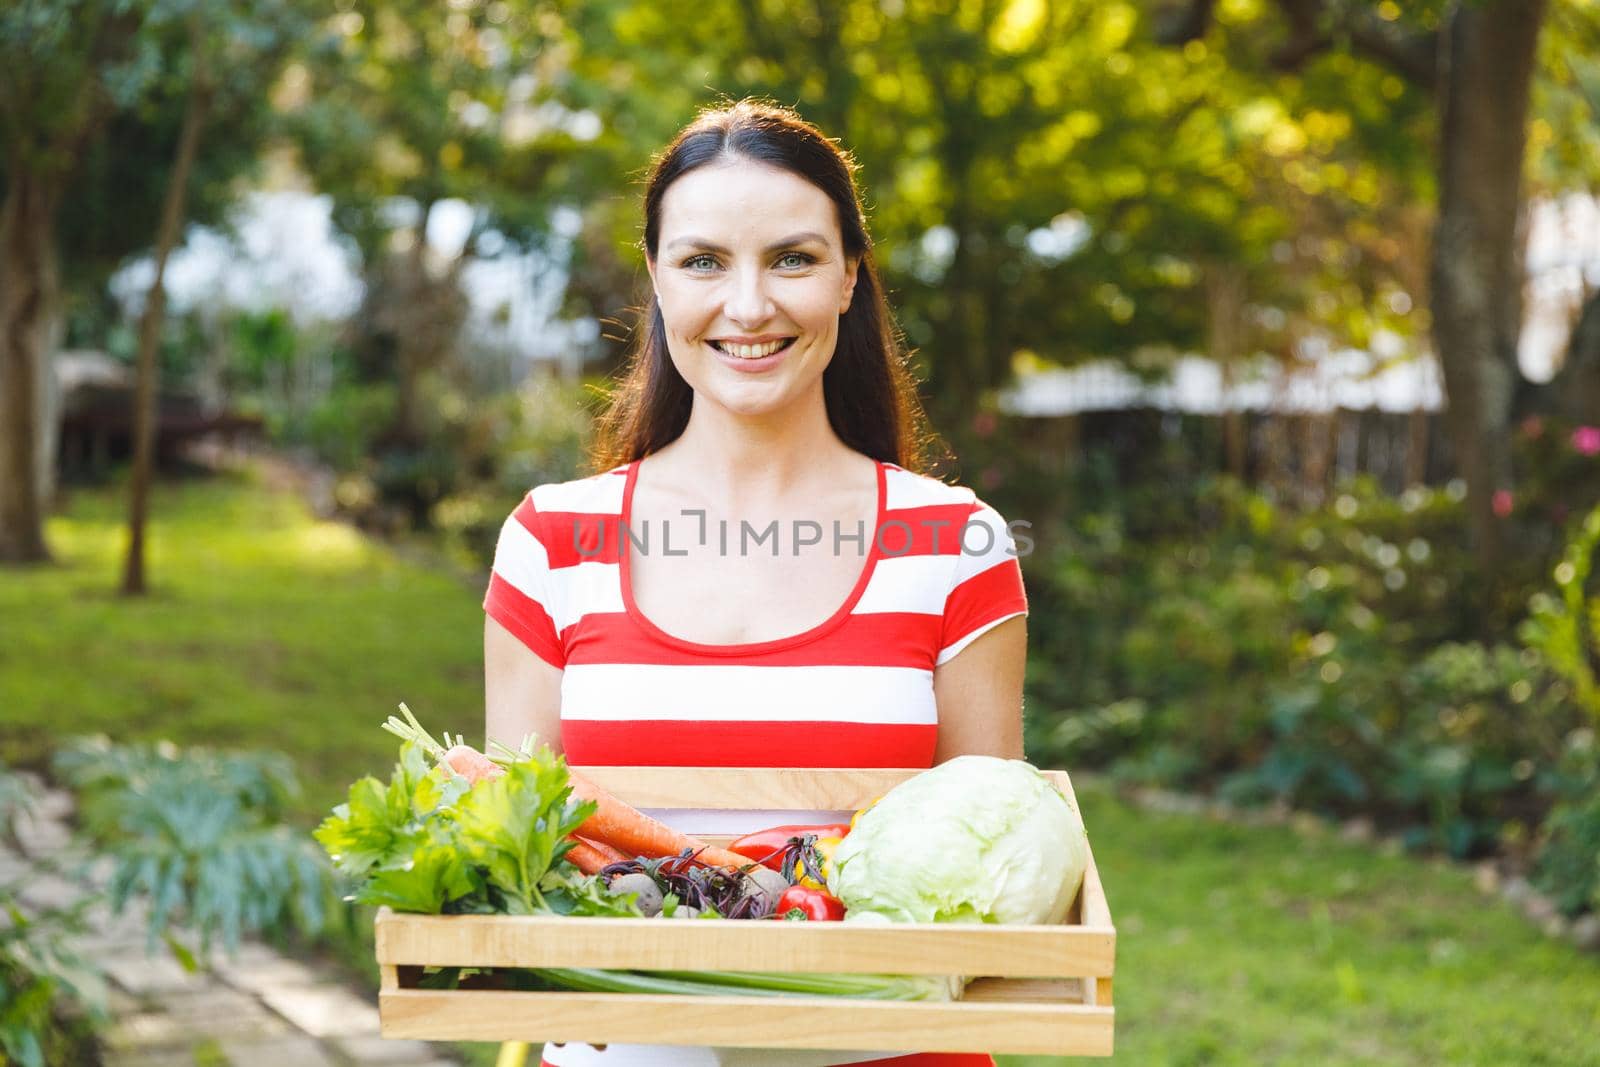 Portrait of smiling caucasian woman standing in garden holding box of fresh organic vegetables. gardening, self sufficiency and growing home produce.